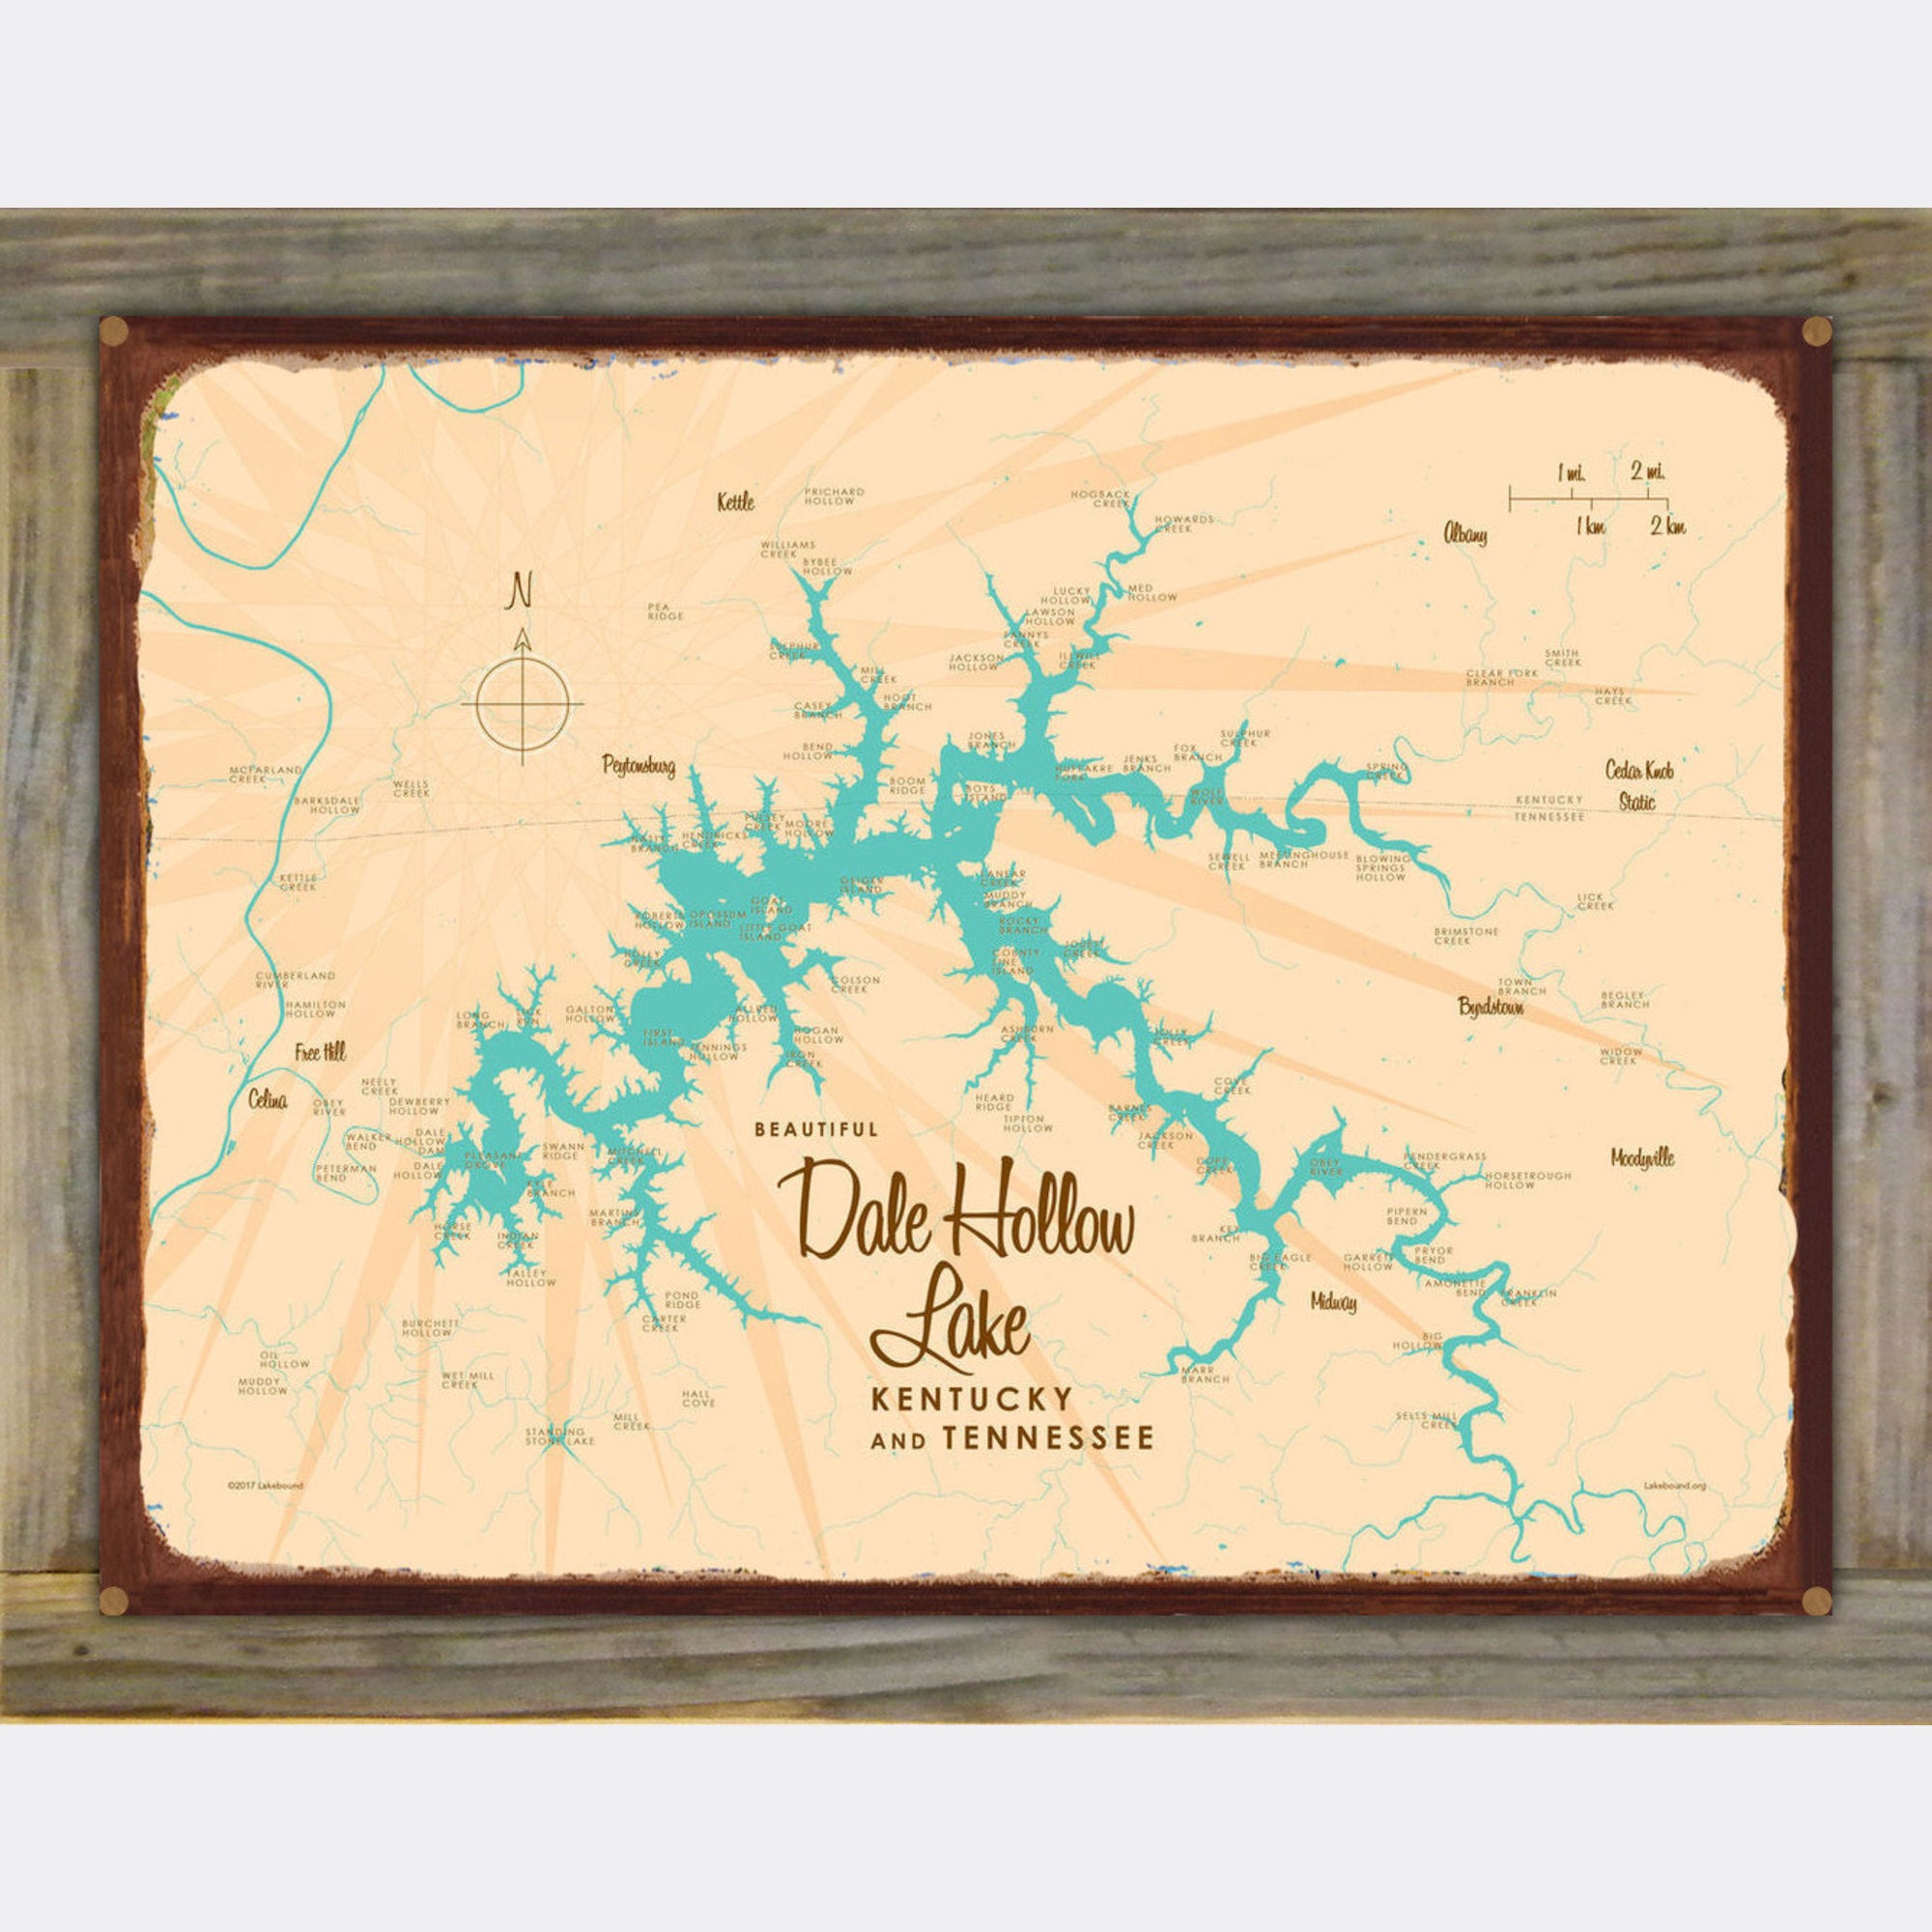 Dale Hollow Lake Kentucky Tennessee, Wood-Mounted Rustic Metal Sign Map Art